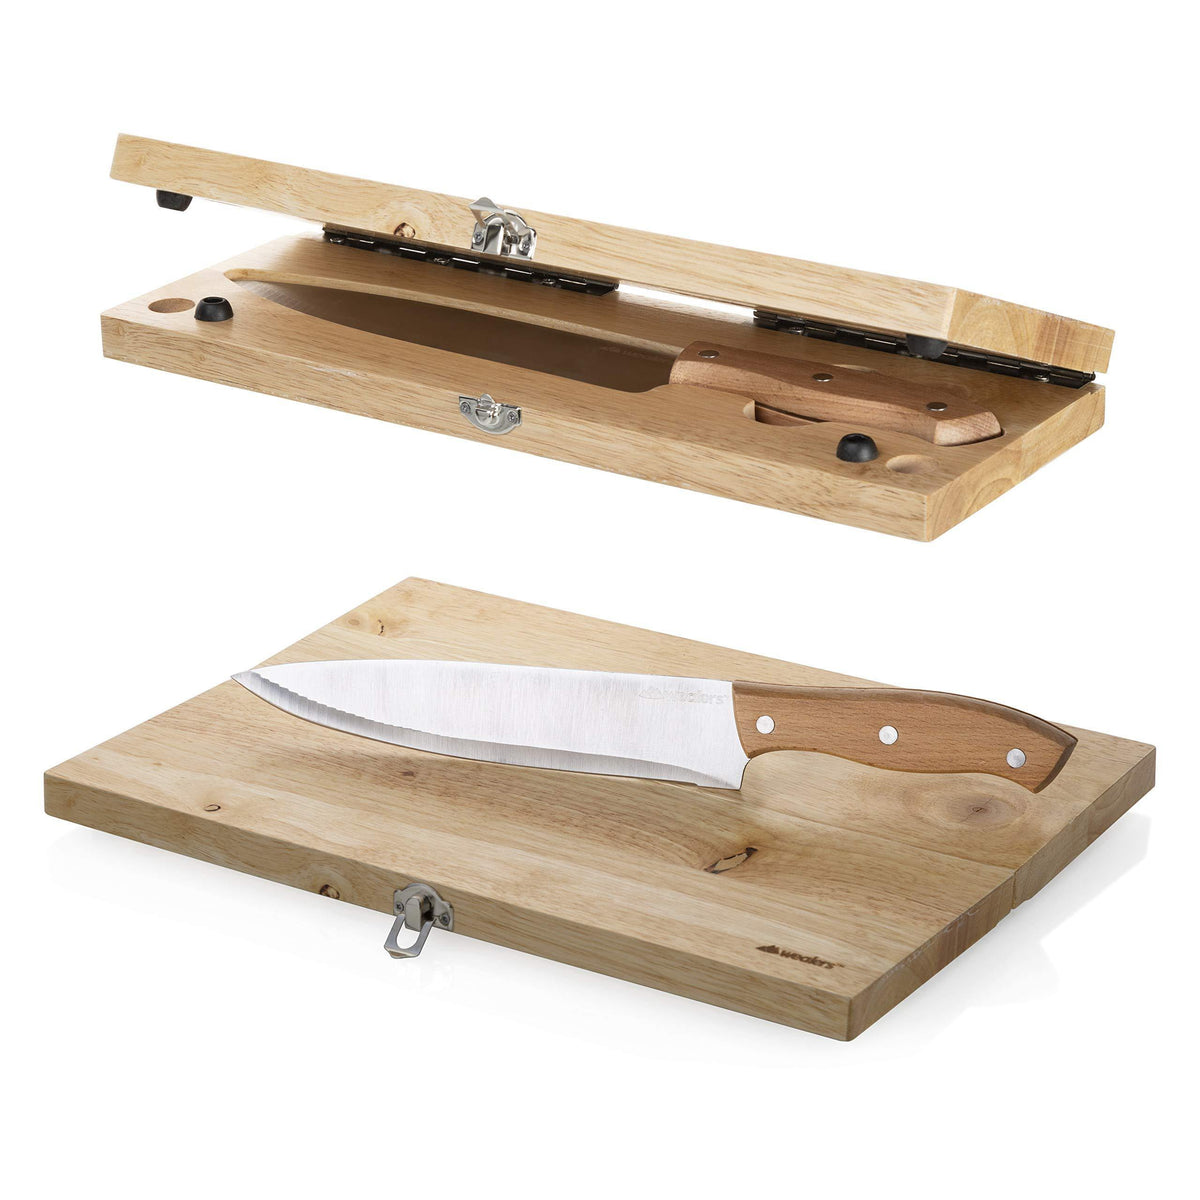 This travel cutting board with a built-in knife cuts out the